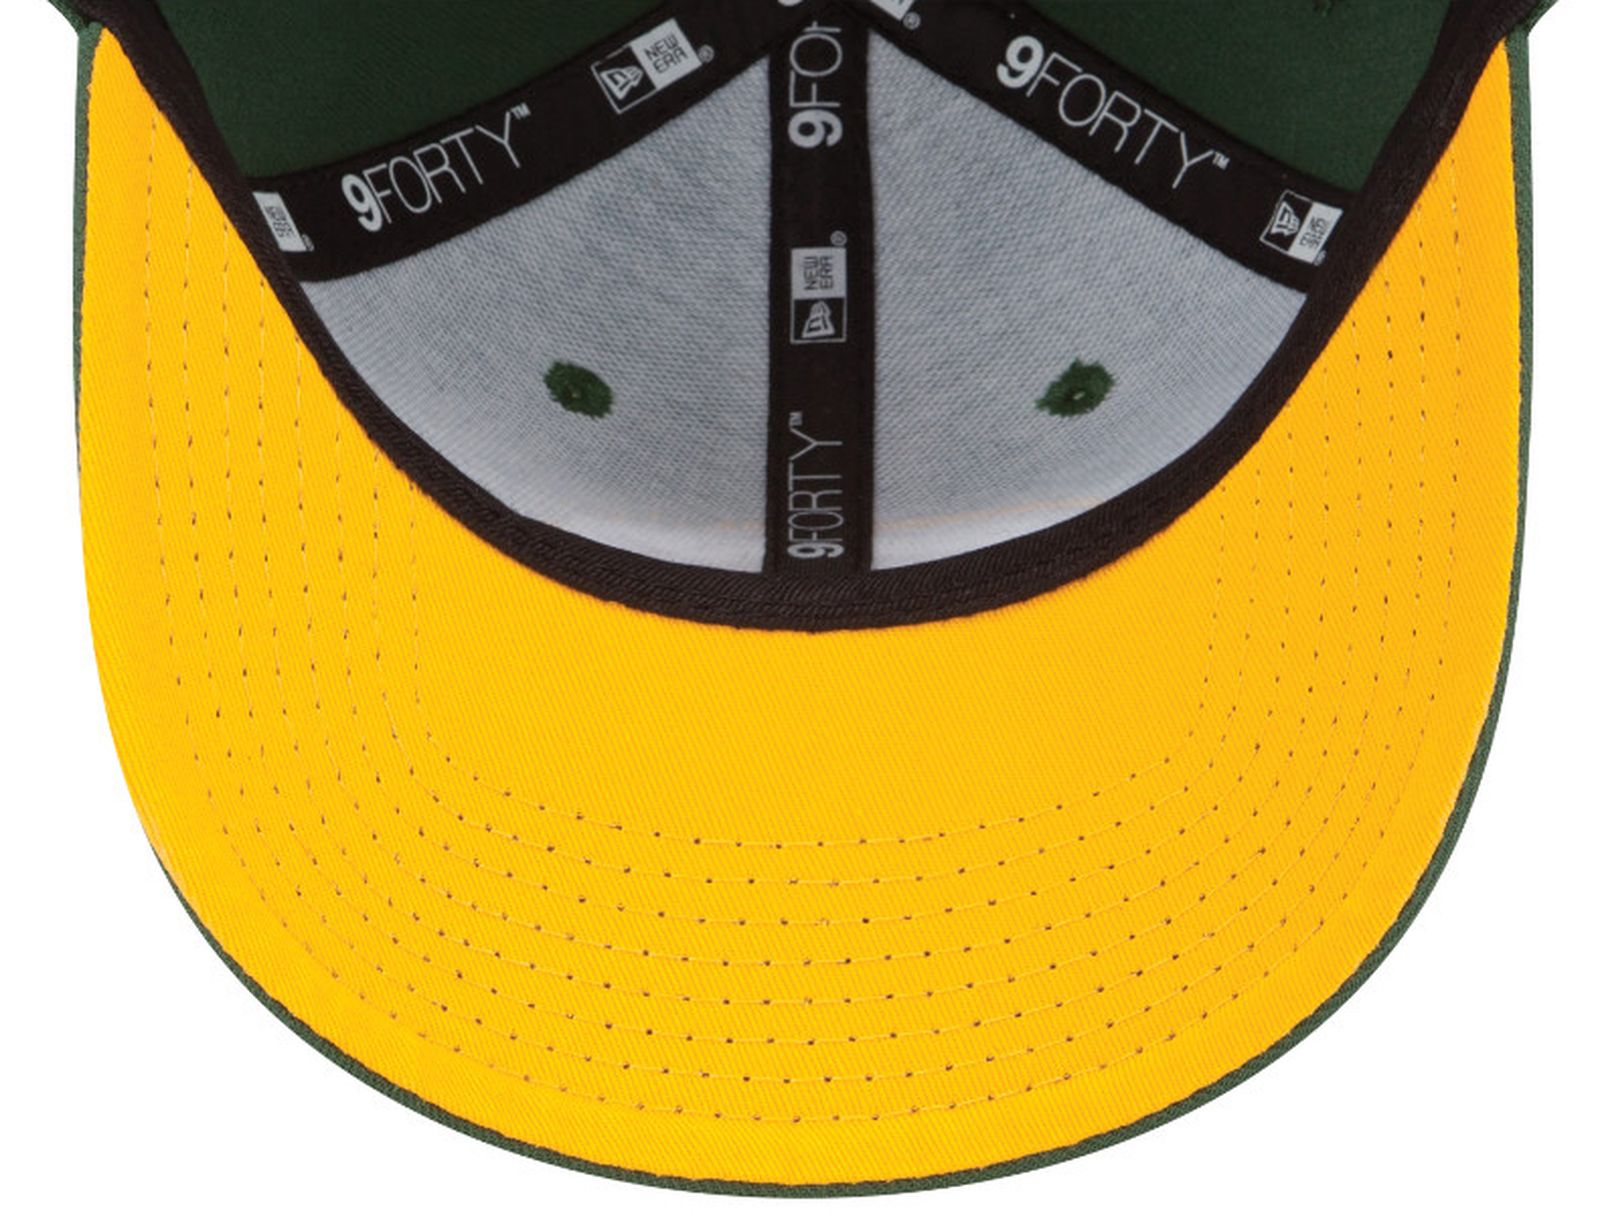 New Era - NFL Green Bay Packers The League 9Forty Cap - green